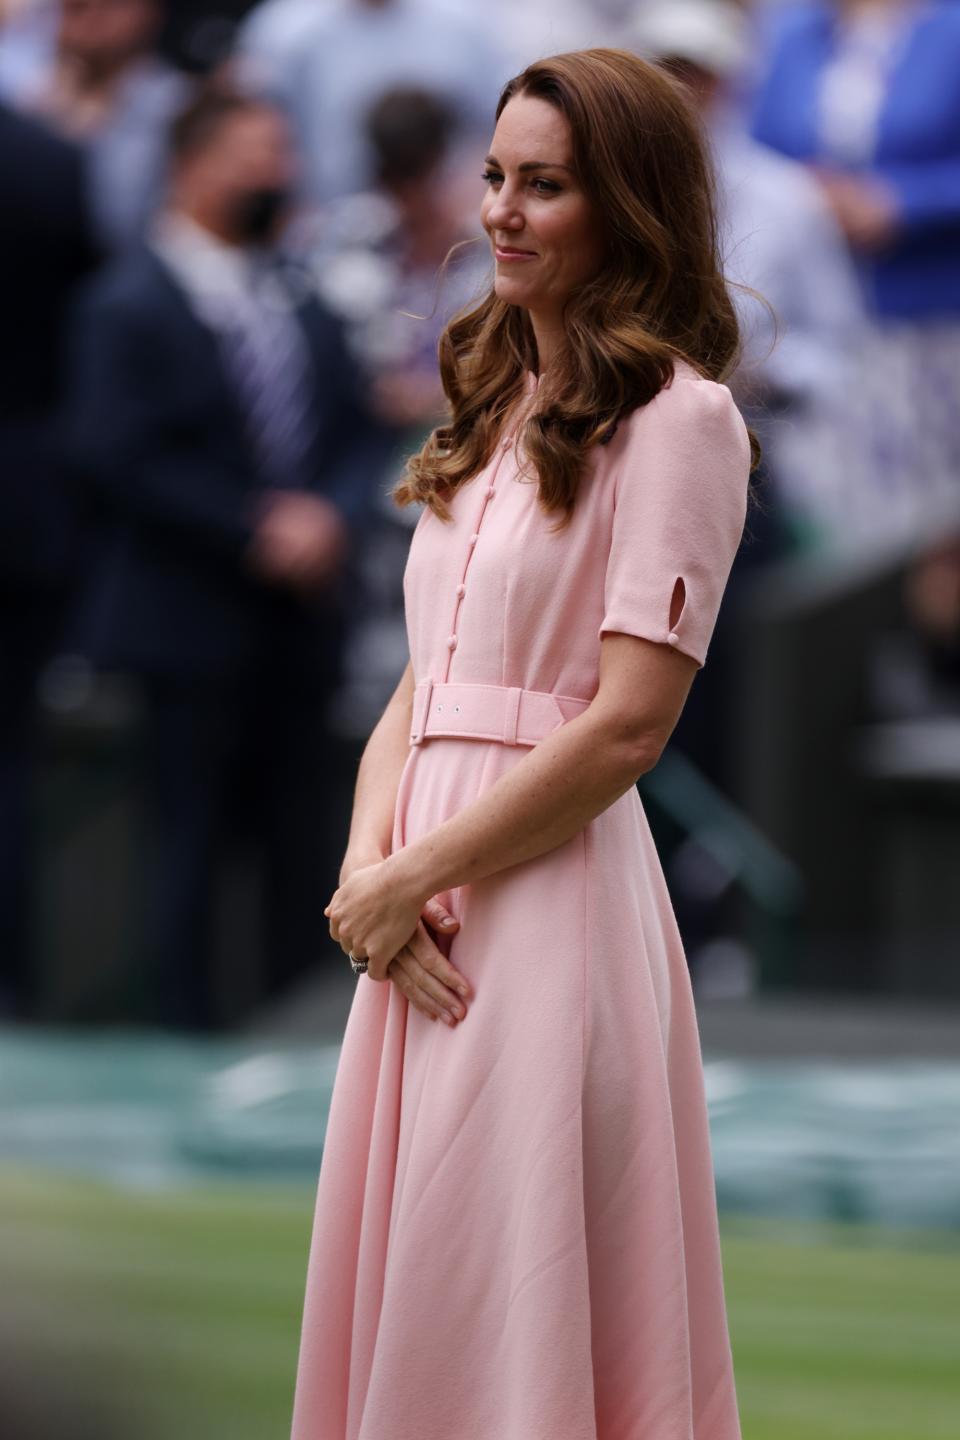 LONDON, ENGLAND - JULY 11: HRH Catherine, Duchess of Cambridge looks on after the men's Singles Final match between Novak Djokovic of Serbia and Matteo Berrettini of Italy on Day Thirteen of The Championships - Wimbledon 2021 at All England Lawn Tennis and Croquet Club on July 11, 2021 in London, England. (Photo by Steven Paston - Pool/Getty Images)